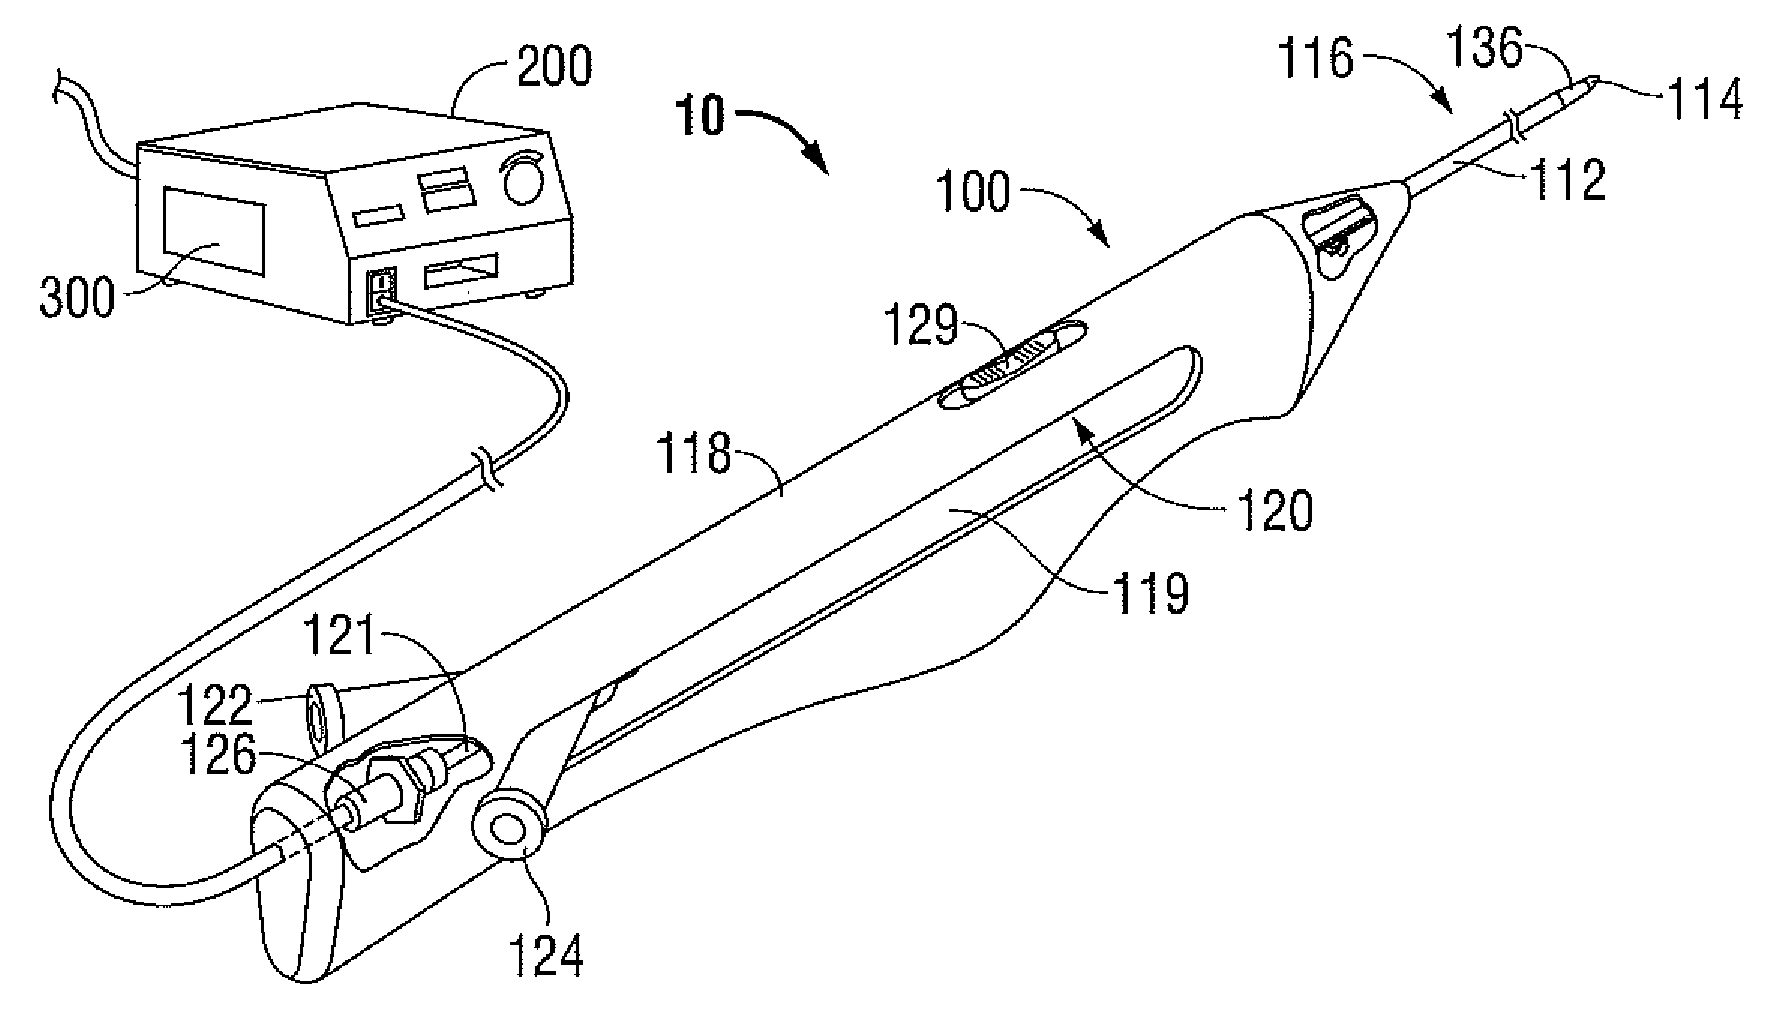 Method and System for Delivering a Medicant